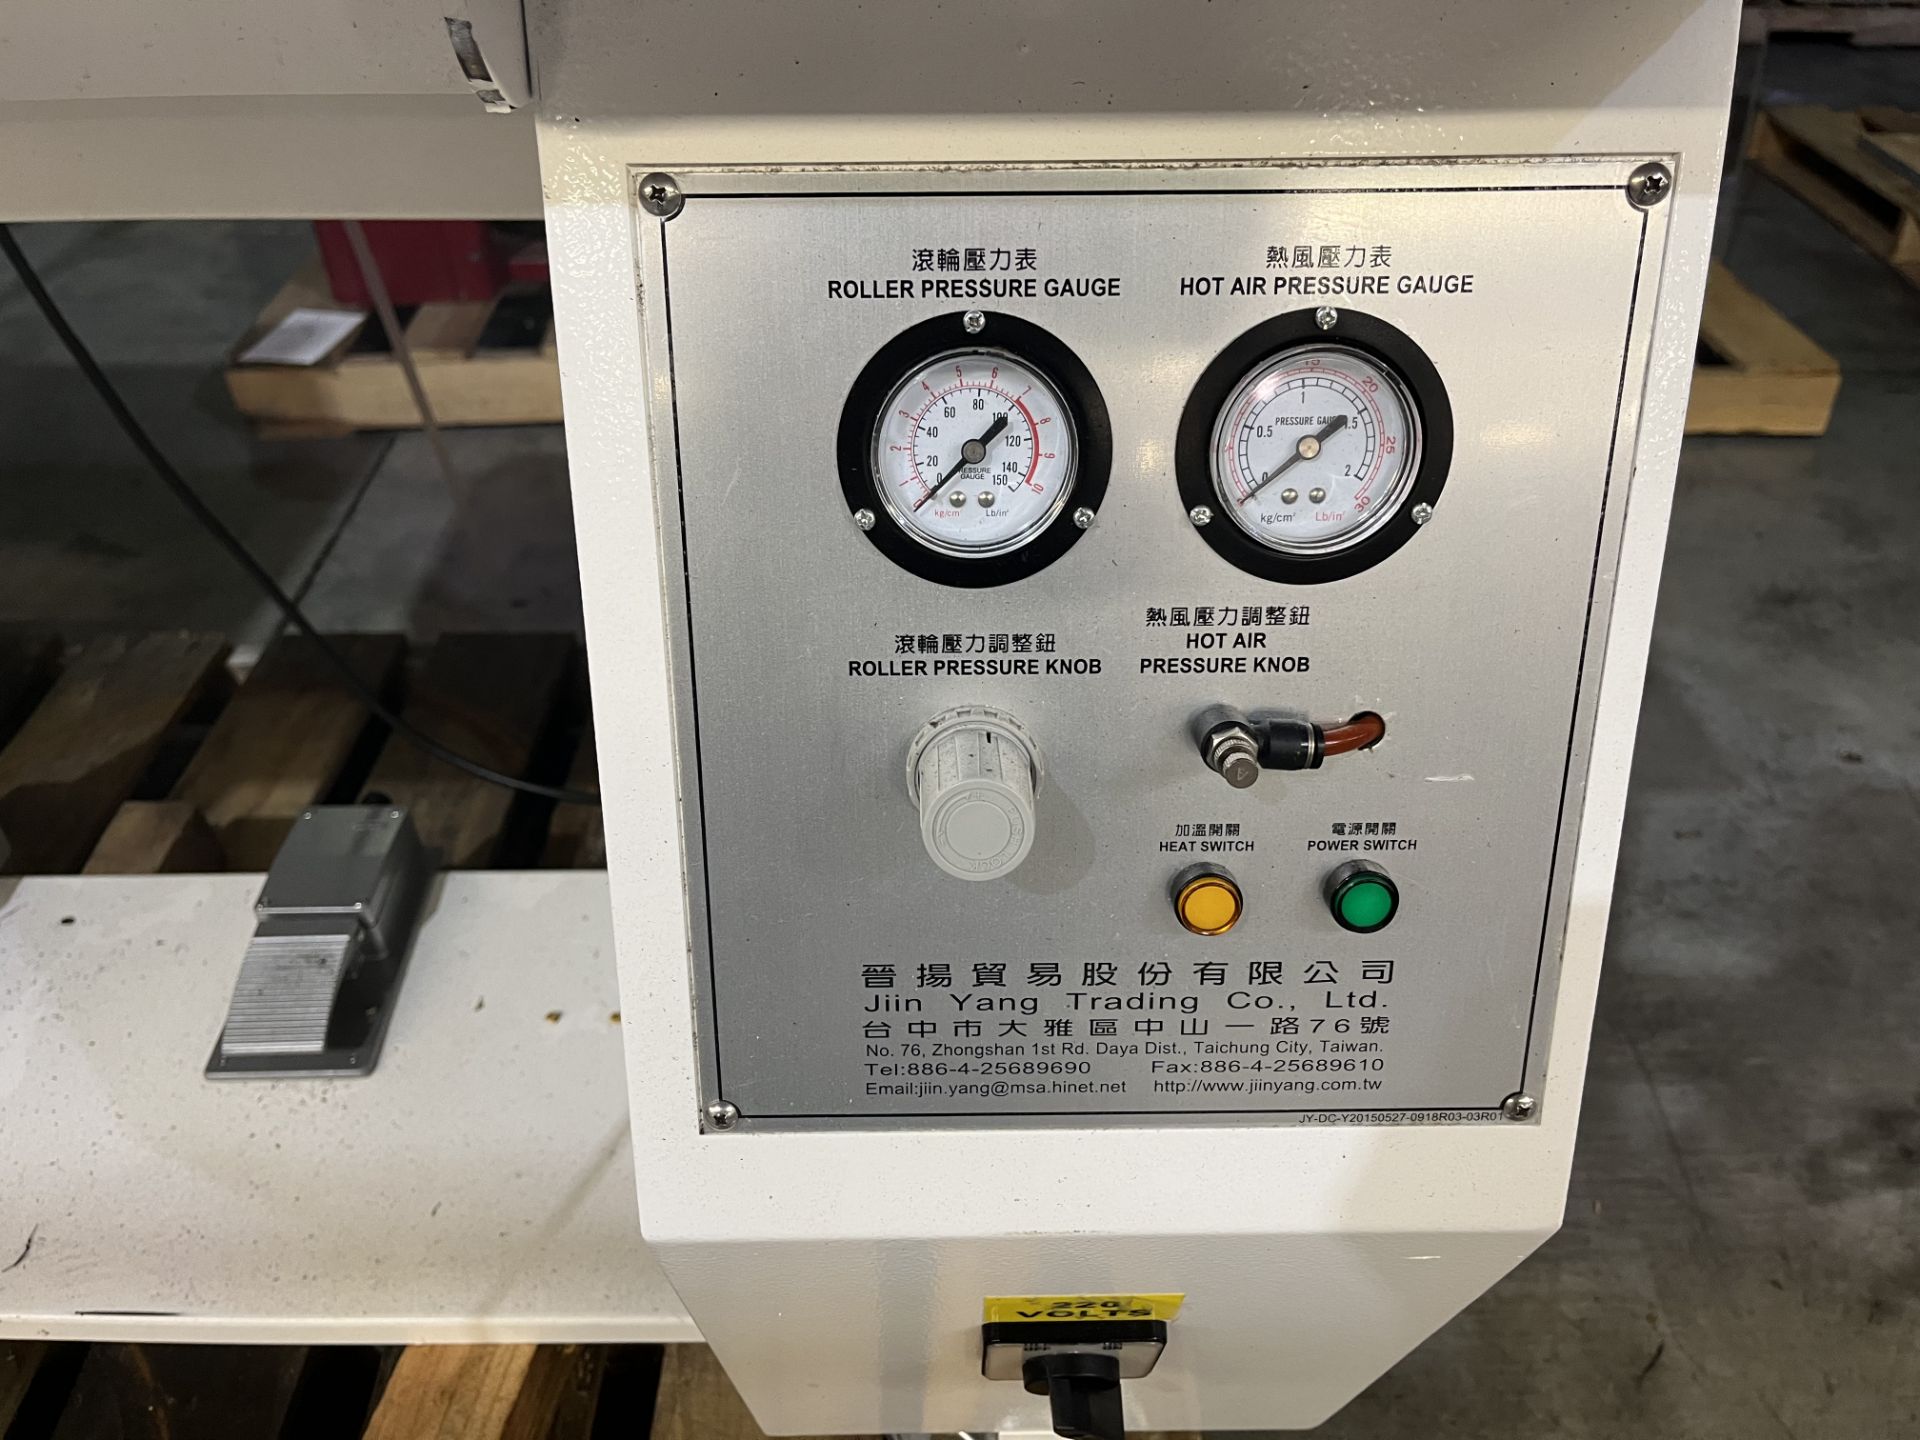 JIIN Yang Model HA 850TR Seam Sealing 220 Volt Single Phase Machine in Good, Working Condition S/N - Image 5 of 8